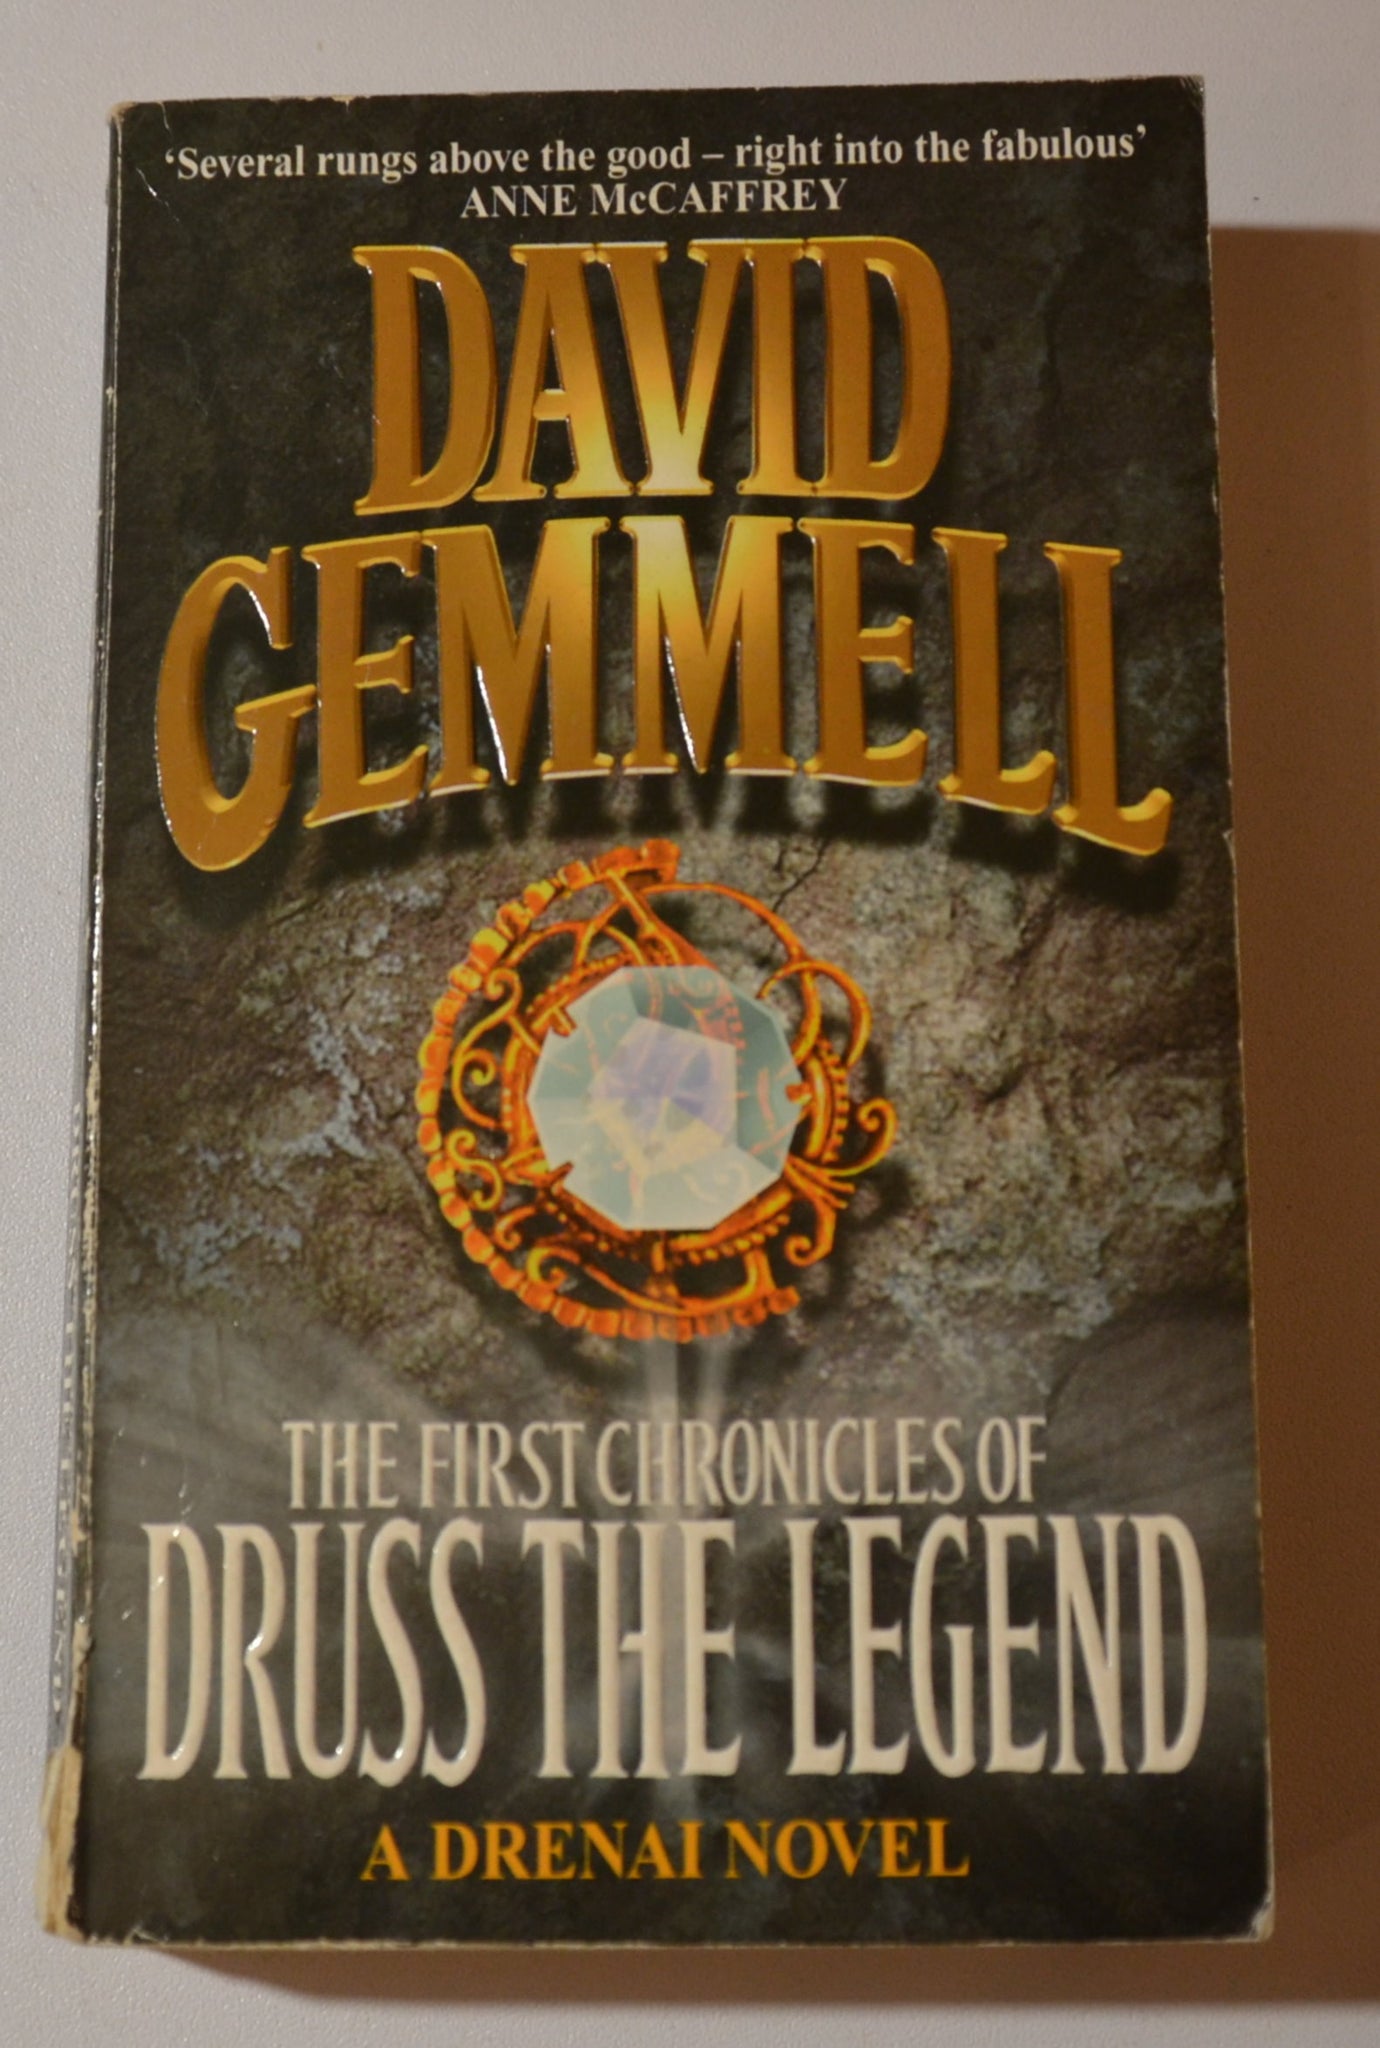 The First Chronicles of Druss the legend